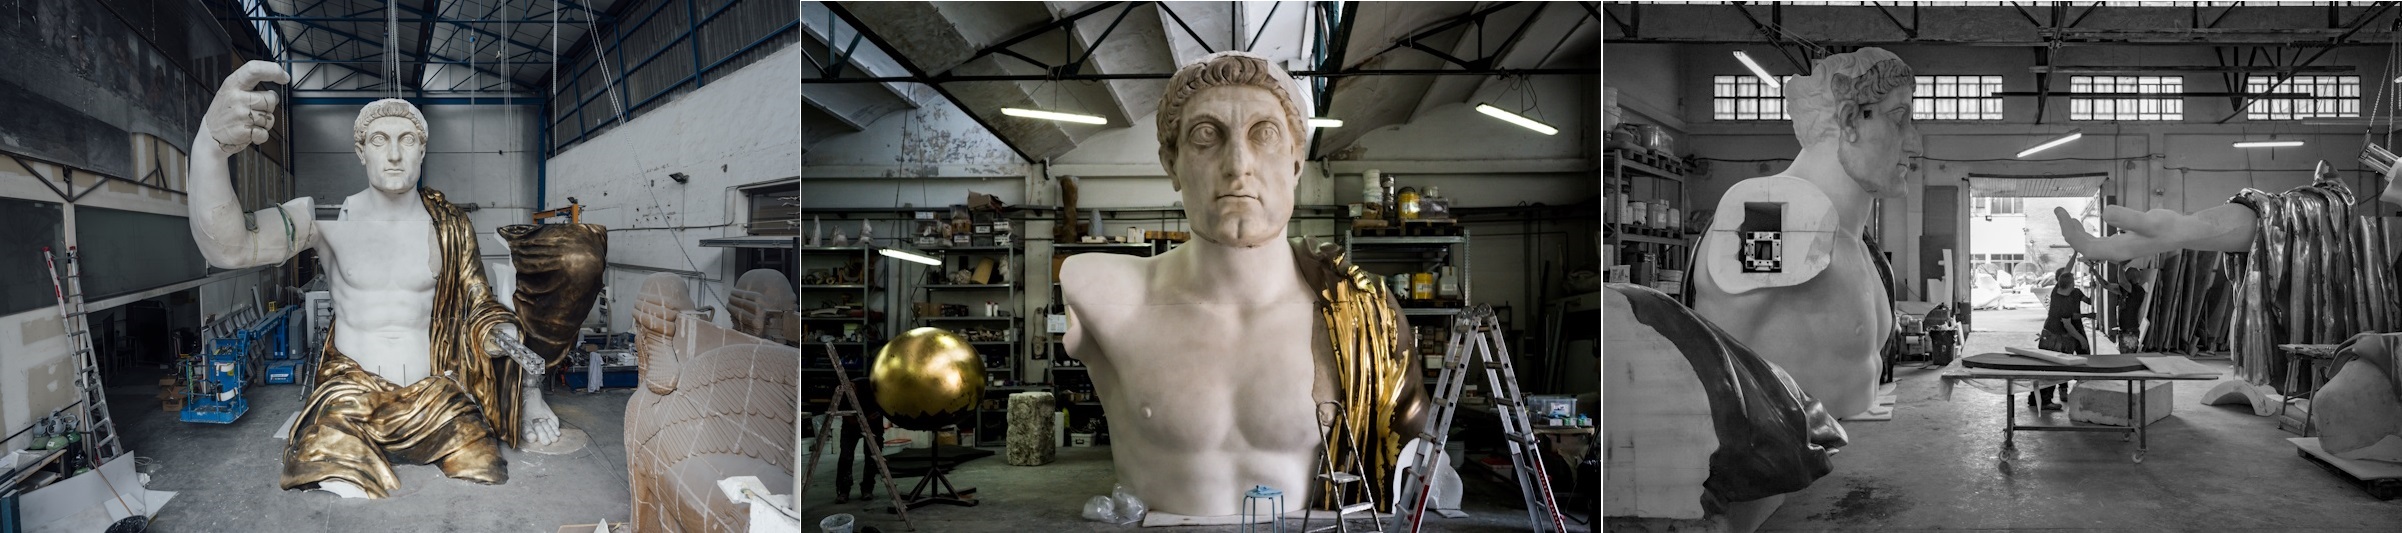 The Colossal Statue of Constantine: FREE Exhibition at the Capitoline Museums 63